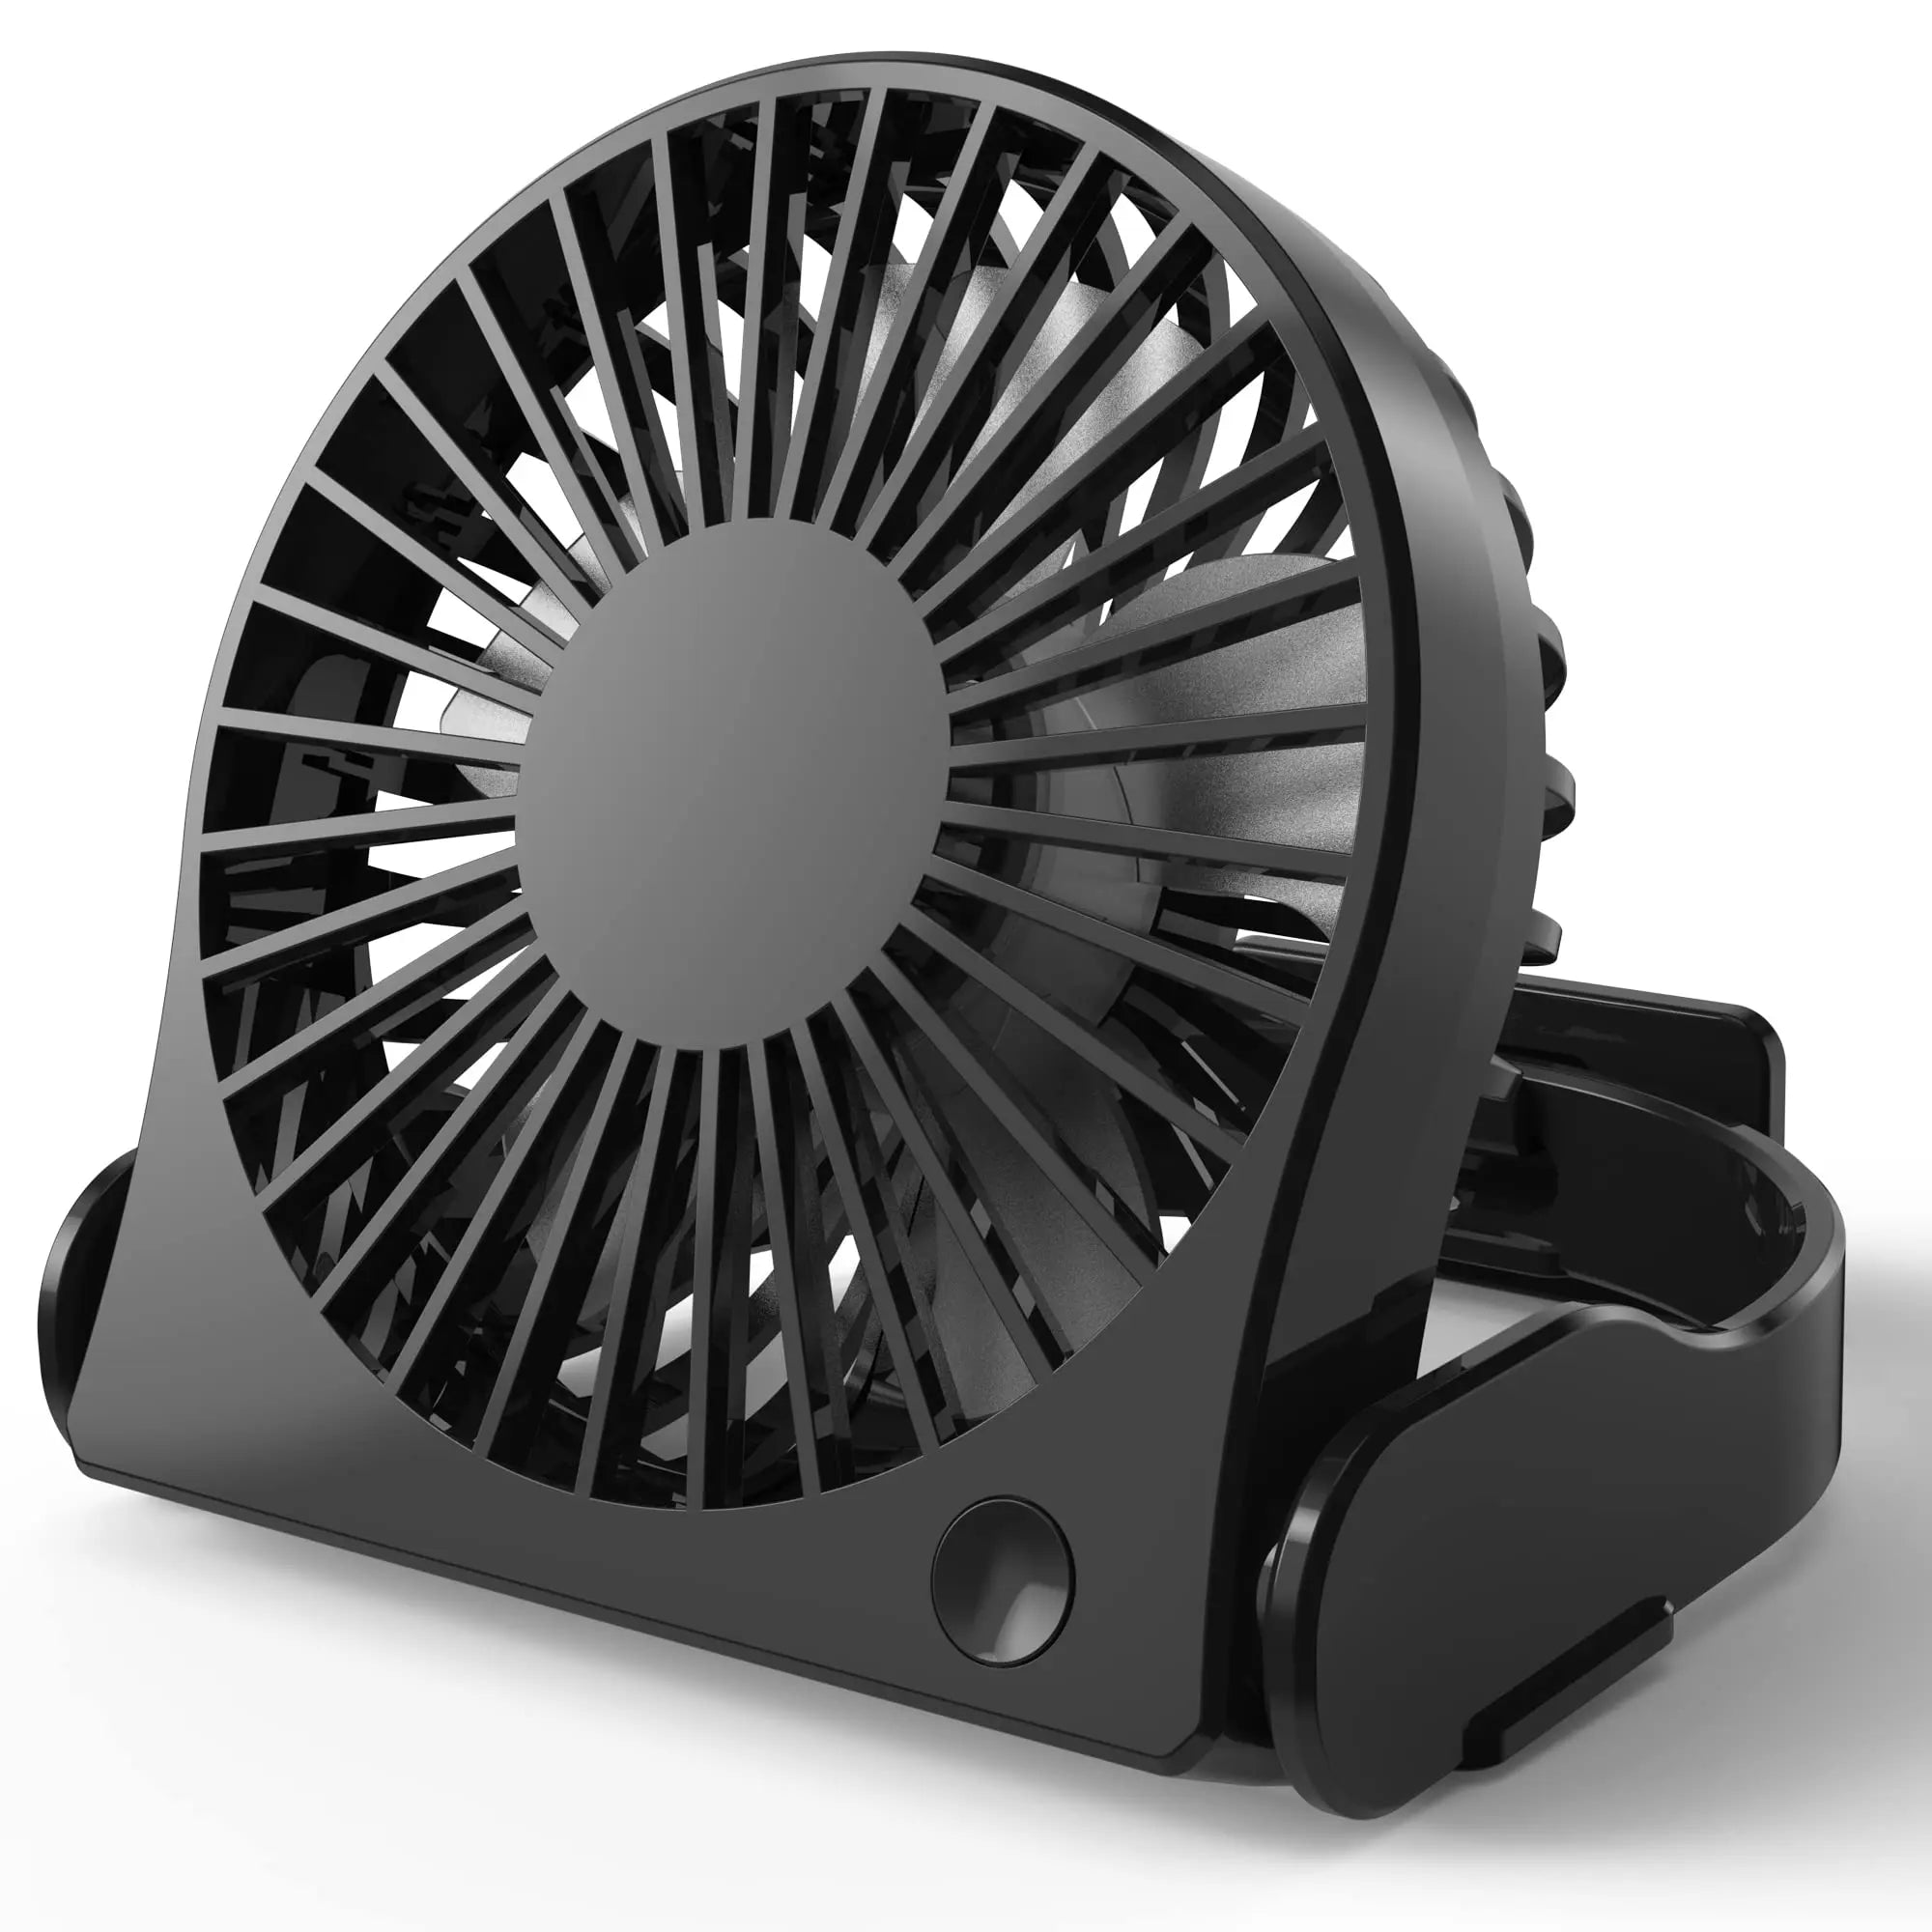 USB Desk Fan, USB Powered Personal - Small, Mini Table Fan for Home Travel More, Powerful and Quiet Operation - ipanergy